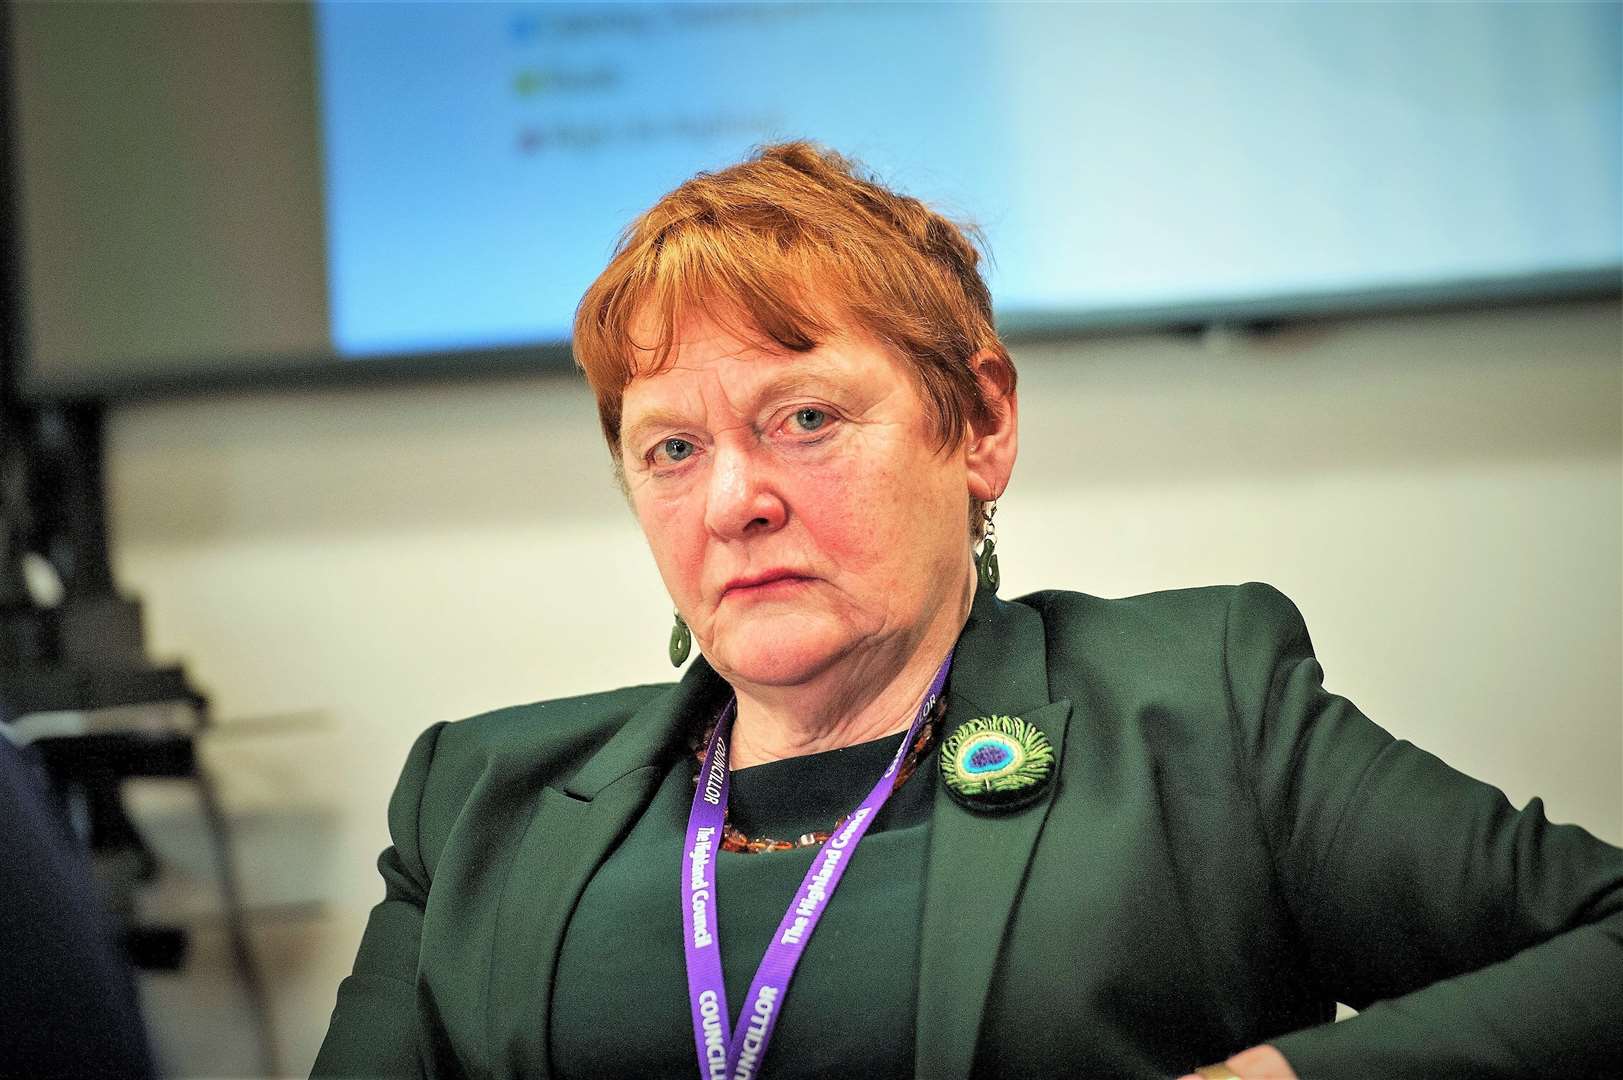 Council leader Margaret Davidson said: 'We are looking for the right person to contribute, lead and help make public services in the region the very best they can be.'